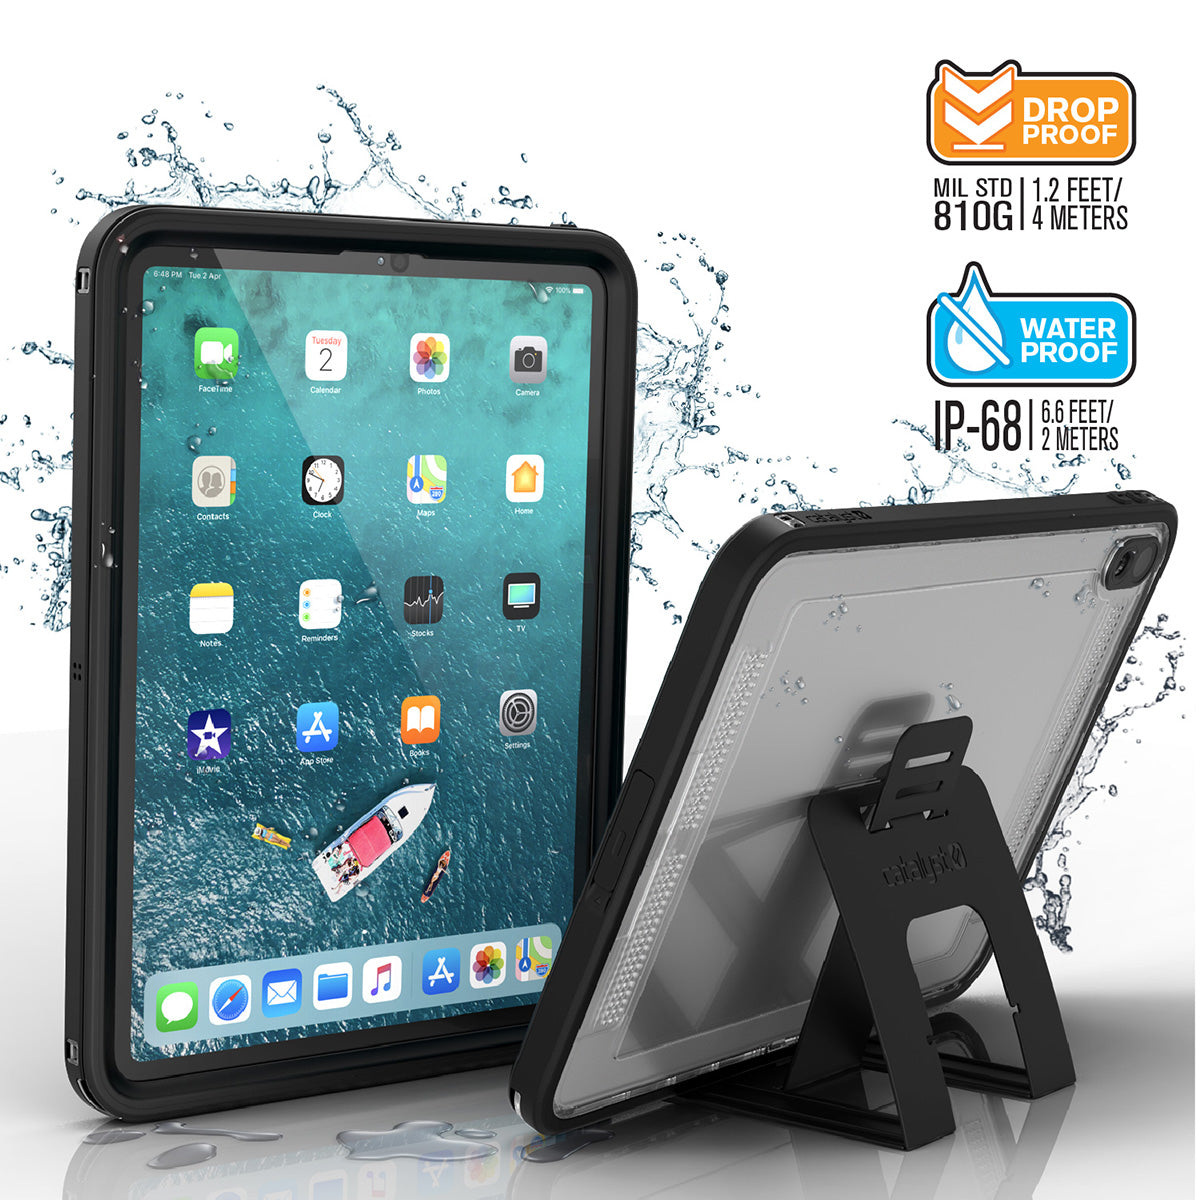 Catalyst iPad Pro (Gen 1), 11" - Waterproof Case showing the front and the back of the case with removable stand installed text reads drop proof mil std 810g 1.2 feet/ 4 meters waterproof ip-68 6.6 feet/ 2 meters